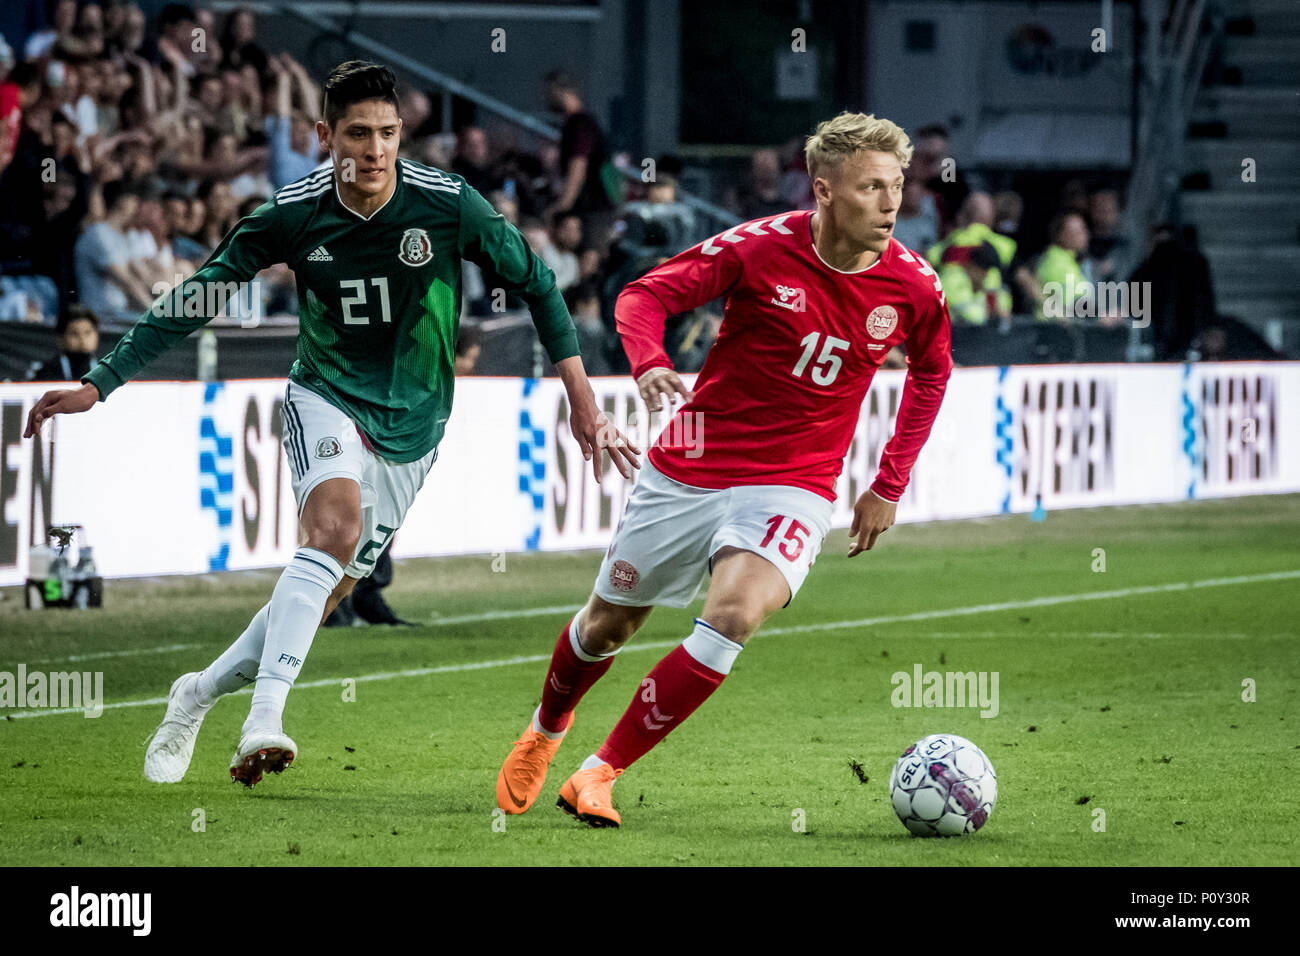 Denmark, Brøndby - June 09, 2018. Viktor Fischer (15) of Denmark and Edson Alvarez (21) of Mexico seen during the football friendly between Denmark and Mexico at Brøndby Stadion. (Photo credit: Gonzales Photo - Kim M. Leland). Credit: Gonzales Photo/Alamy Live News Stock Photo